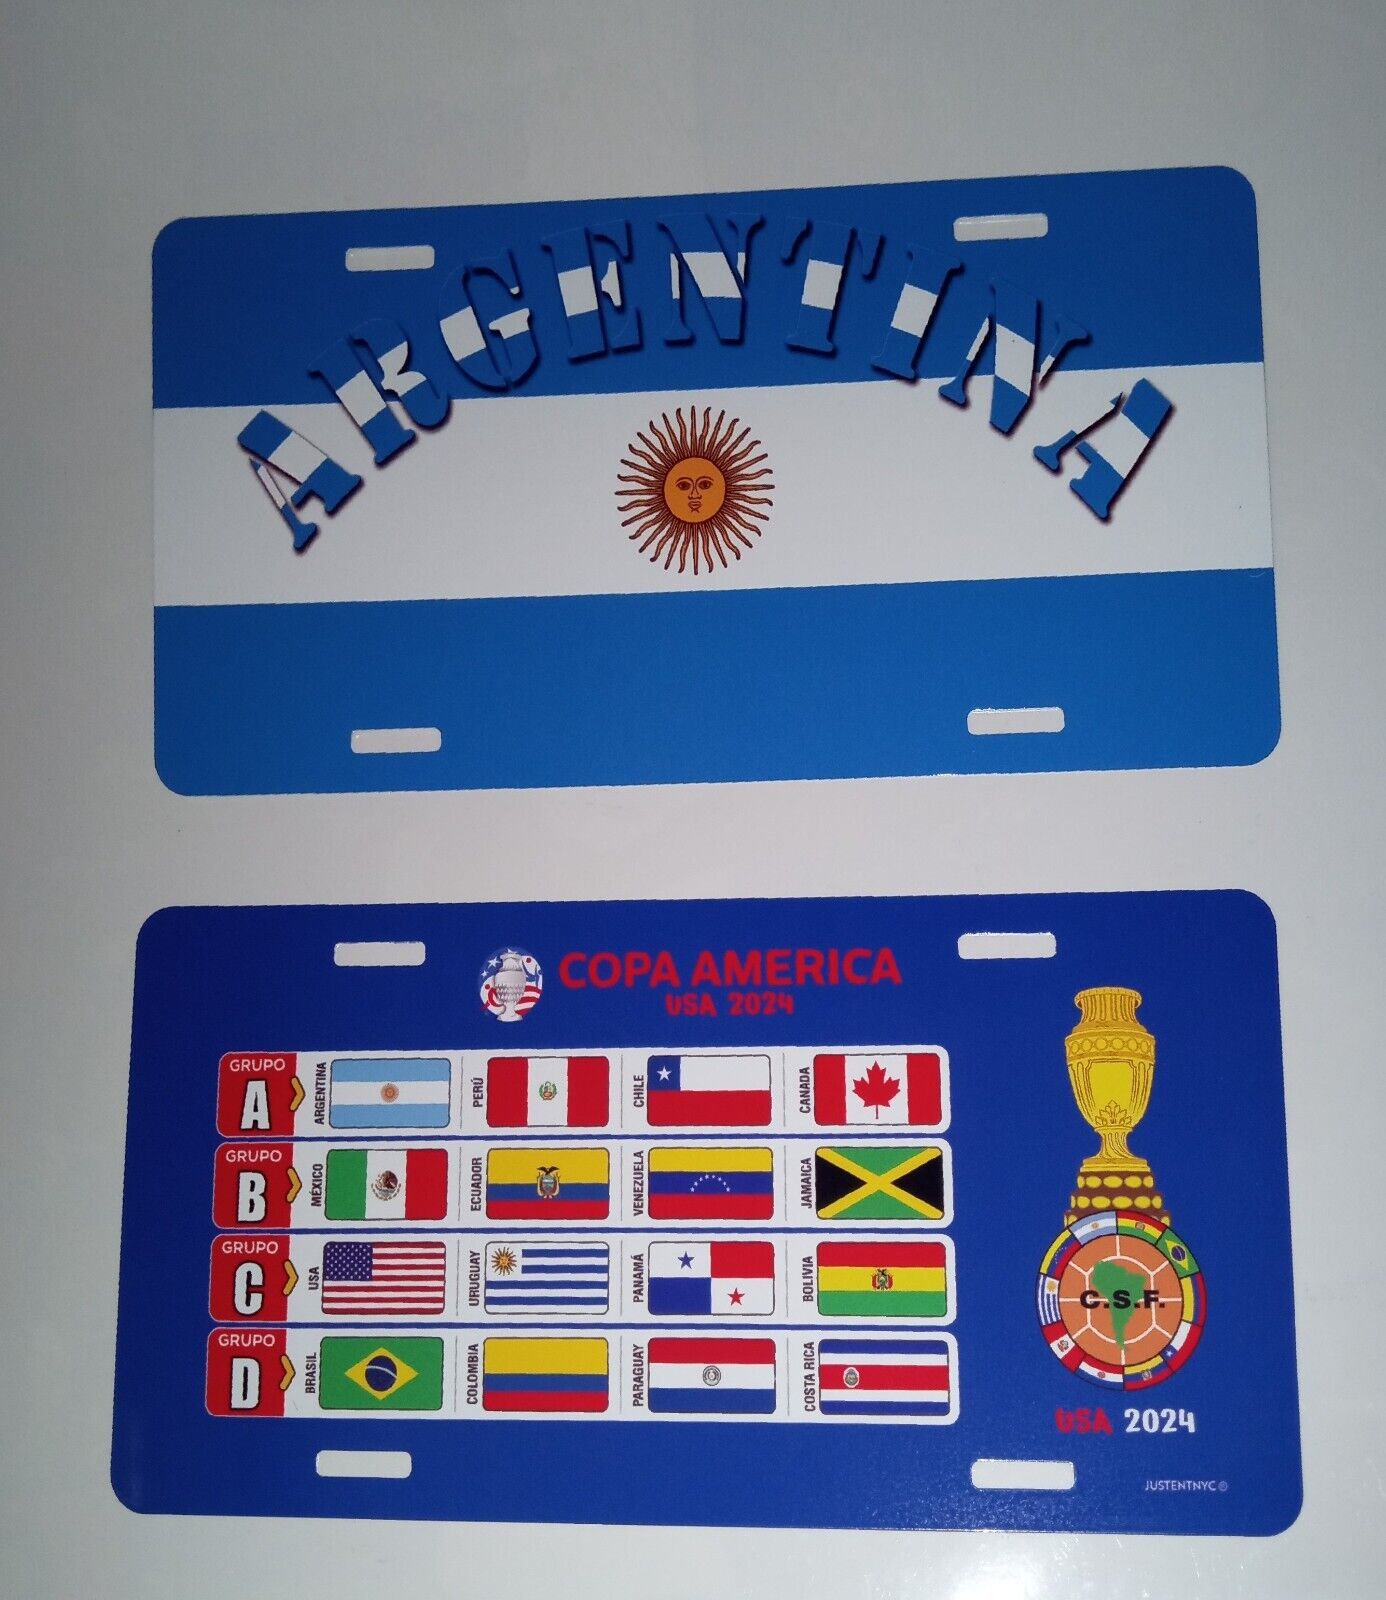 2 ARGENTINA GIFTS: 1 ARGENTINA  LICENSE PLATE + 1 COPA AMERICA LICENSE PLATE $30